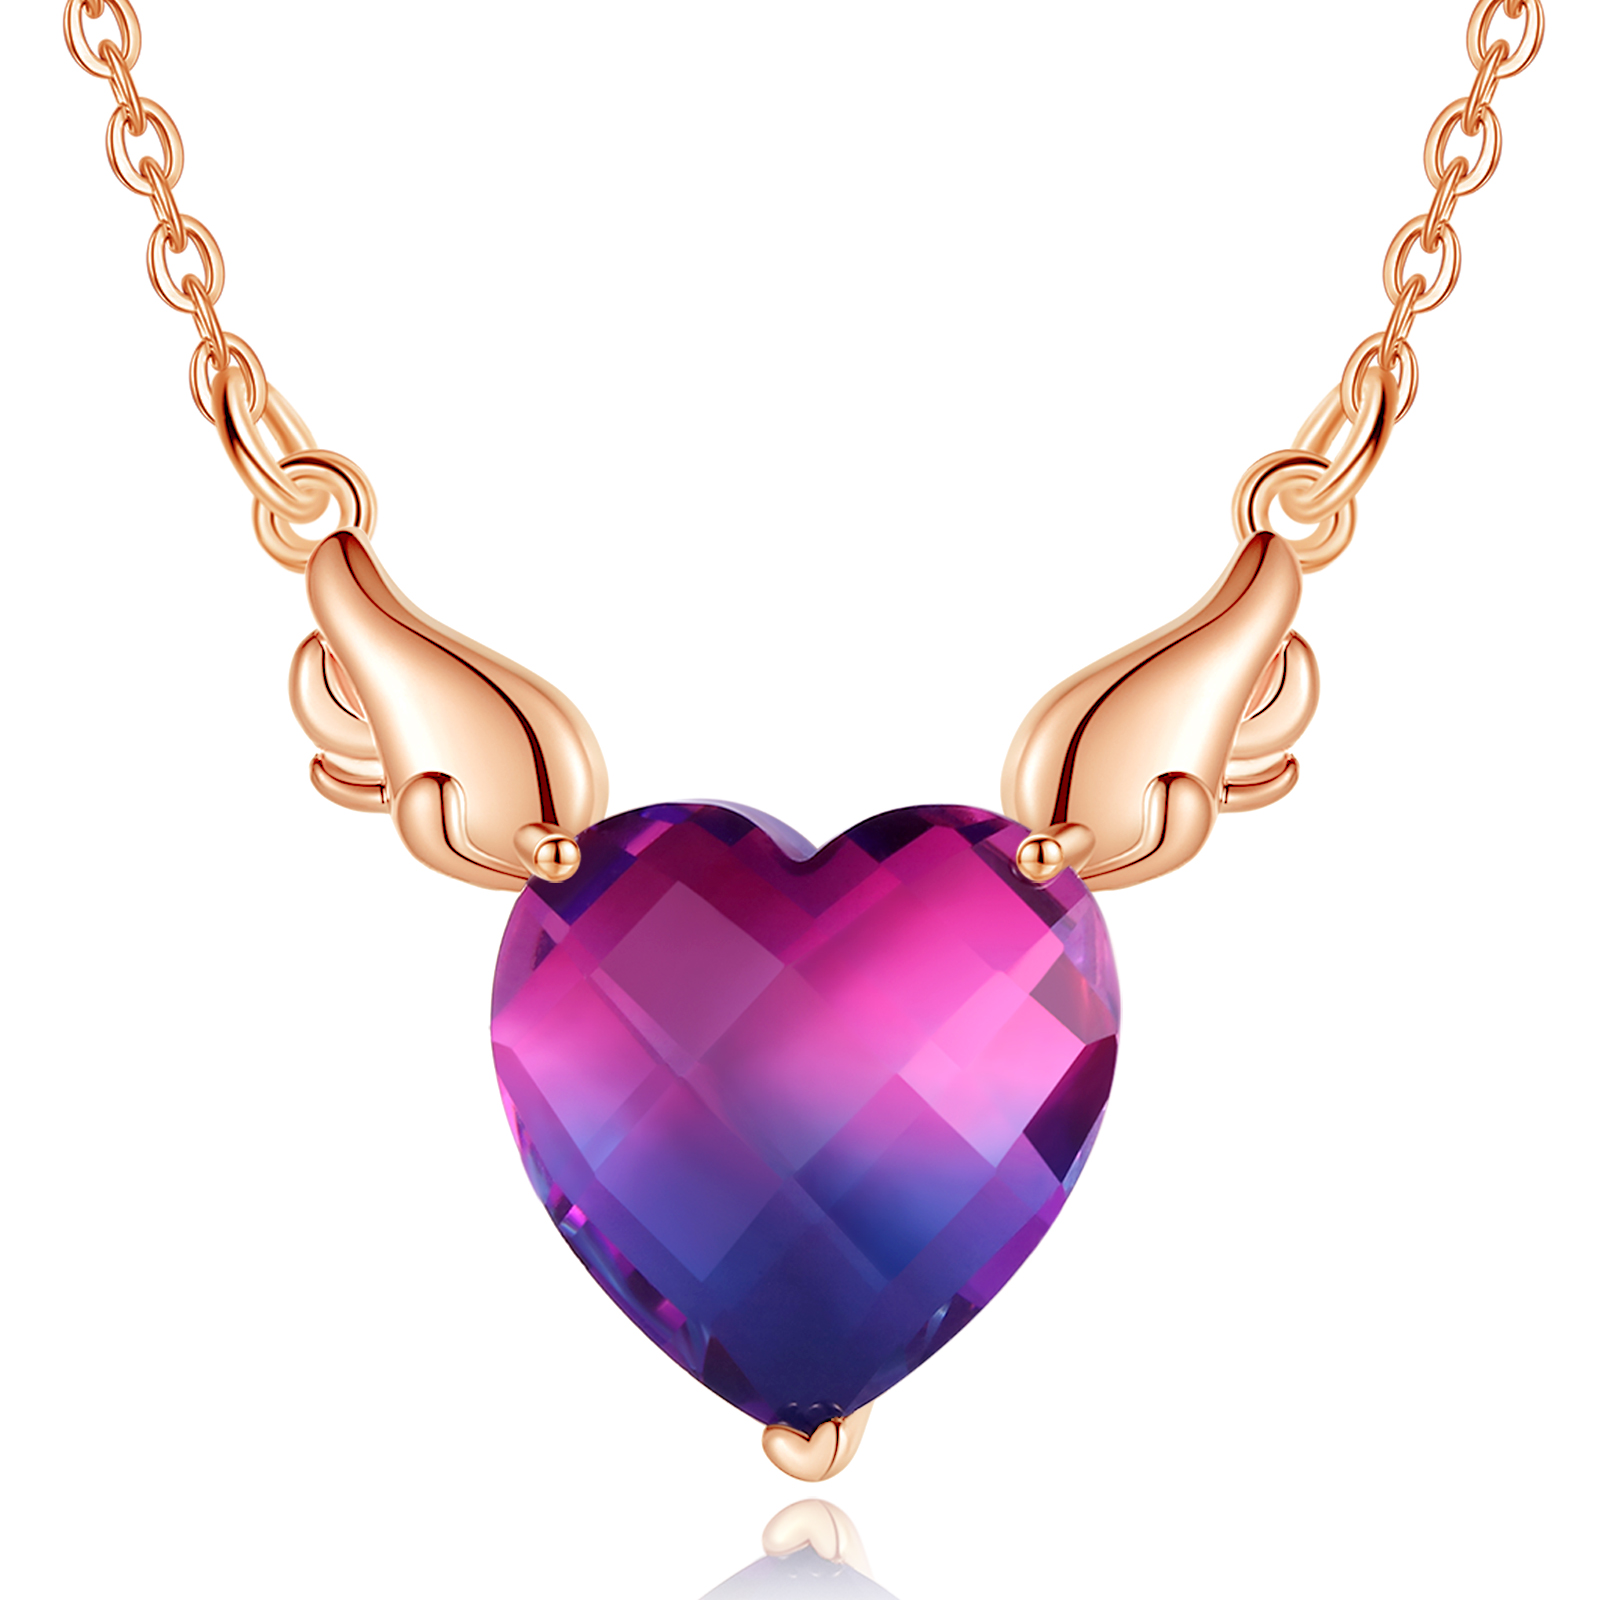 Wholesale jewelry purple and blue color angel wings lucky love heart shape pendant necklace with chain